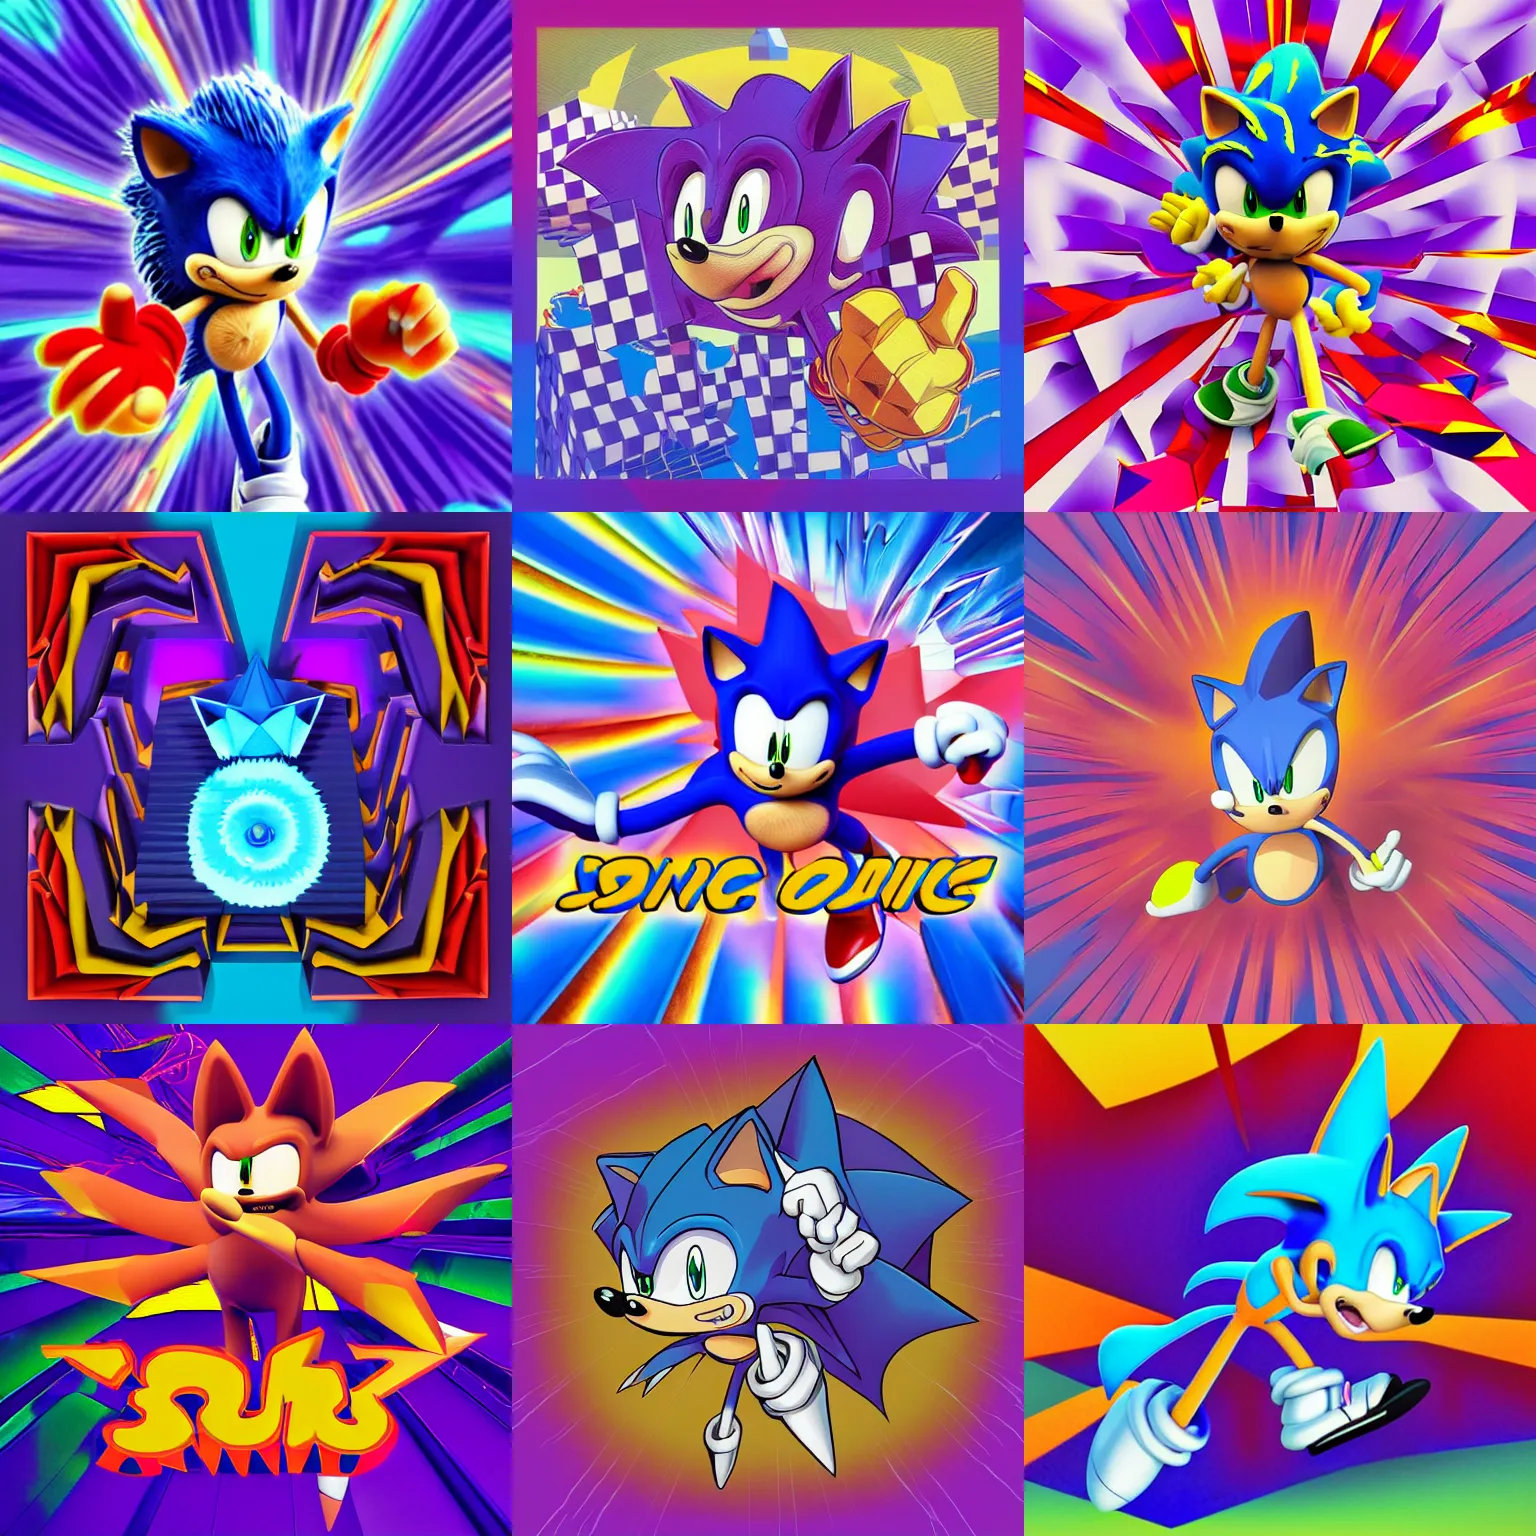 Prompt: surreal sonic the hedgehog sharp, detailed professional, high quality low poly render of MGMT album cover of a liquid dissolving LSD DMT sonic the hedgehog on a flat purple checkerboard plane, 1990s 1992 prerendered graphics phong shaded album cover